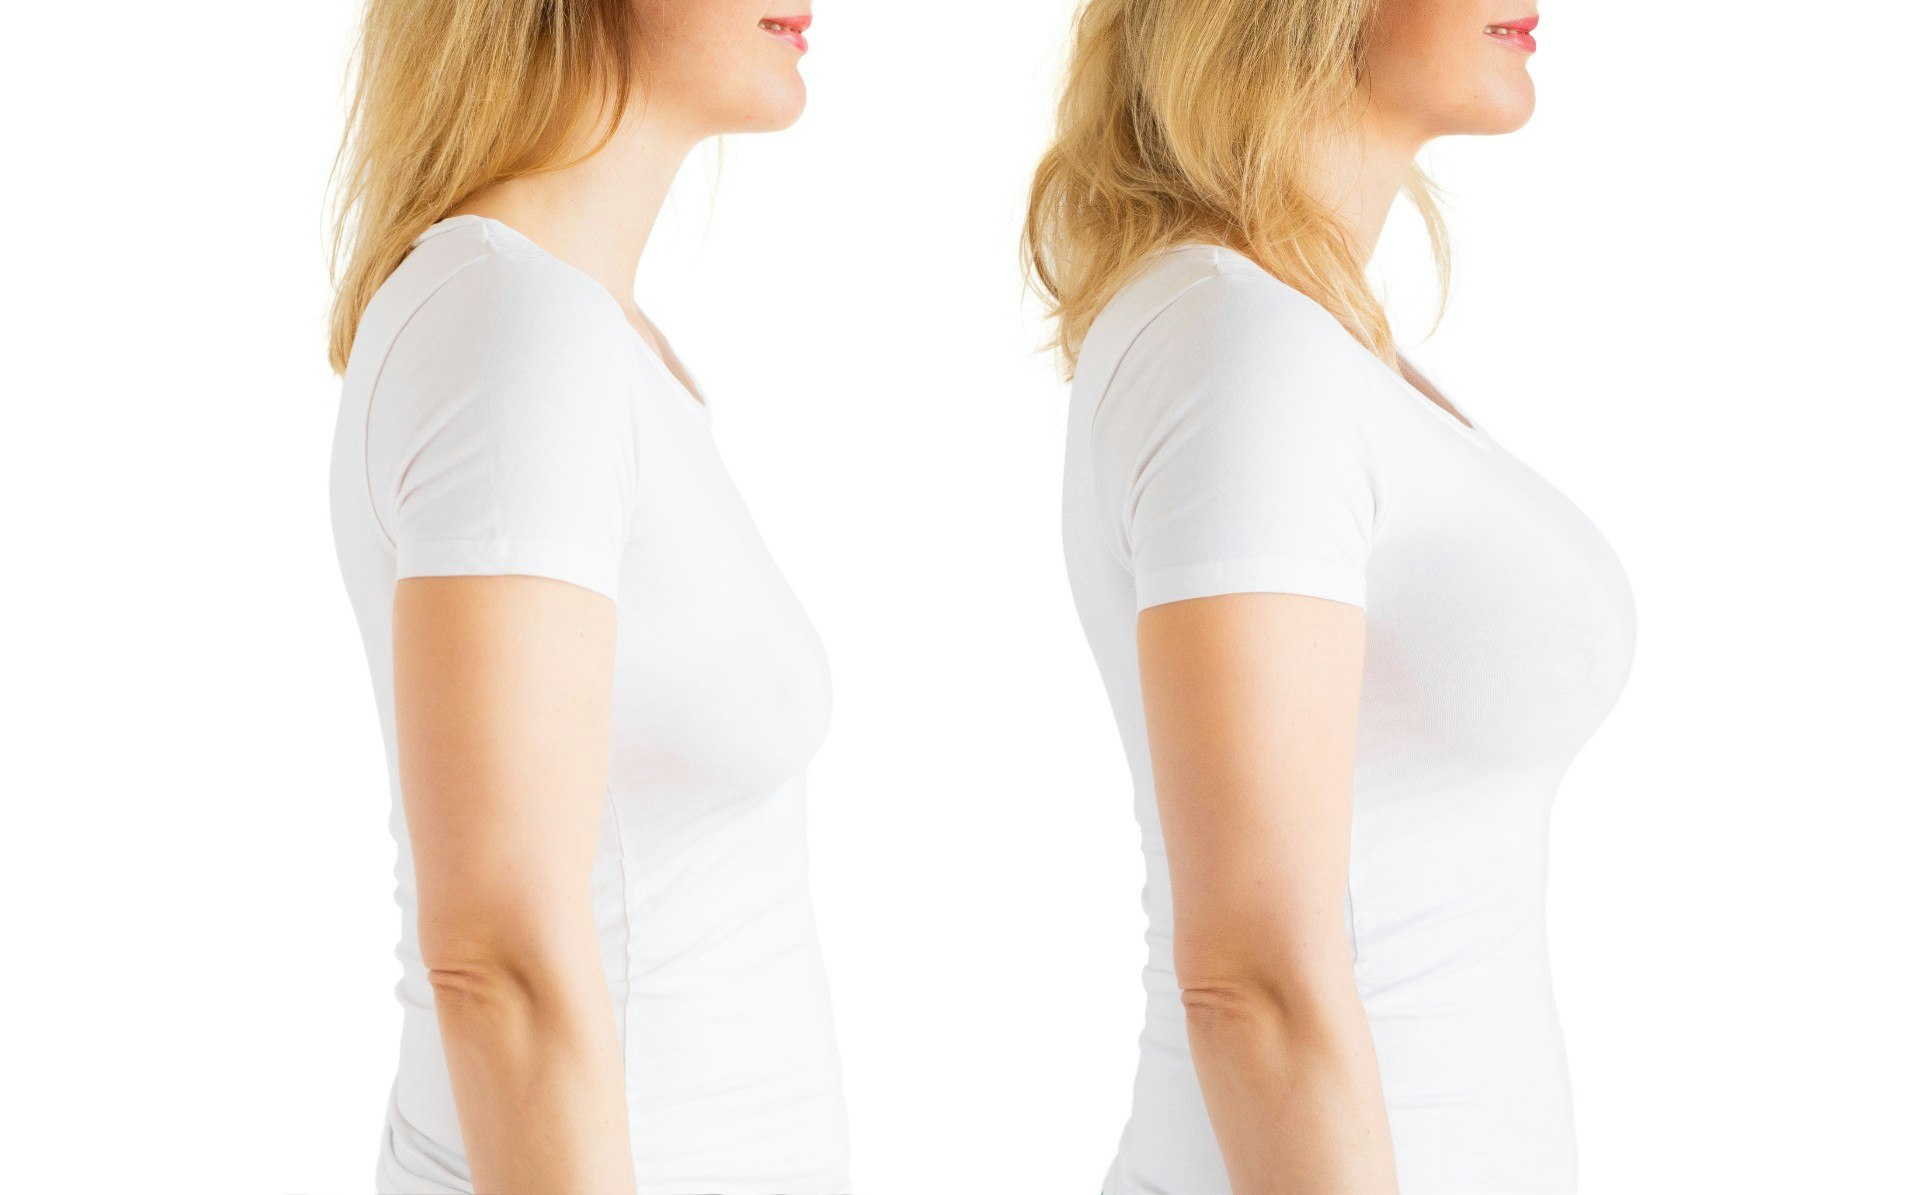 Woman before and after breast augmentation